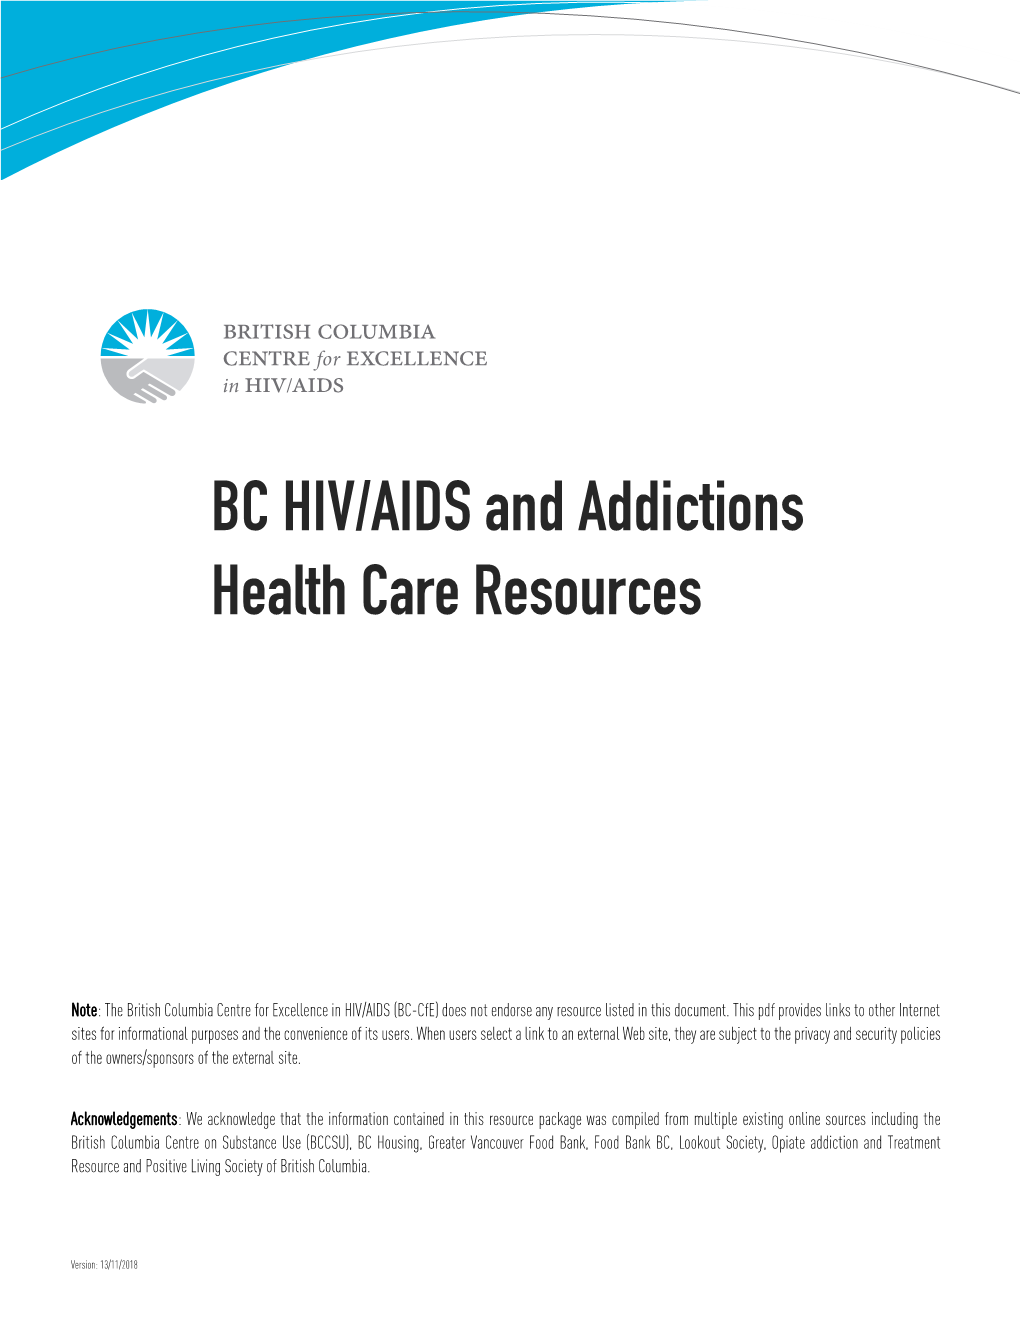 BC HIV/AIDS and Addictions Health Care Resources